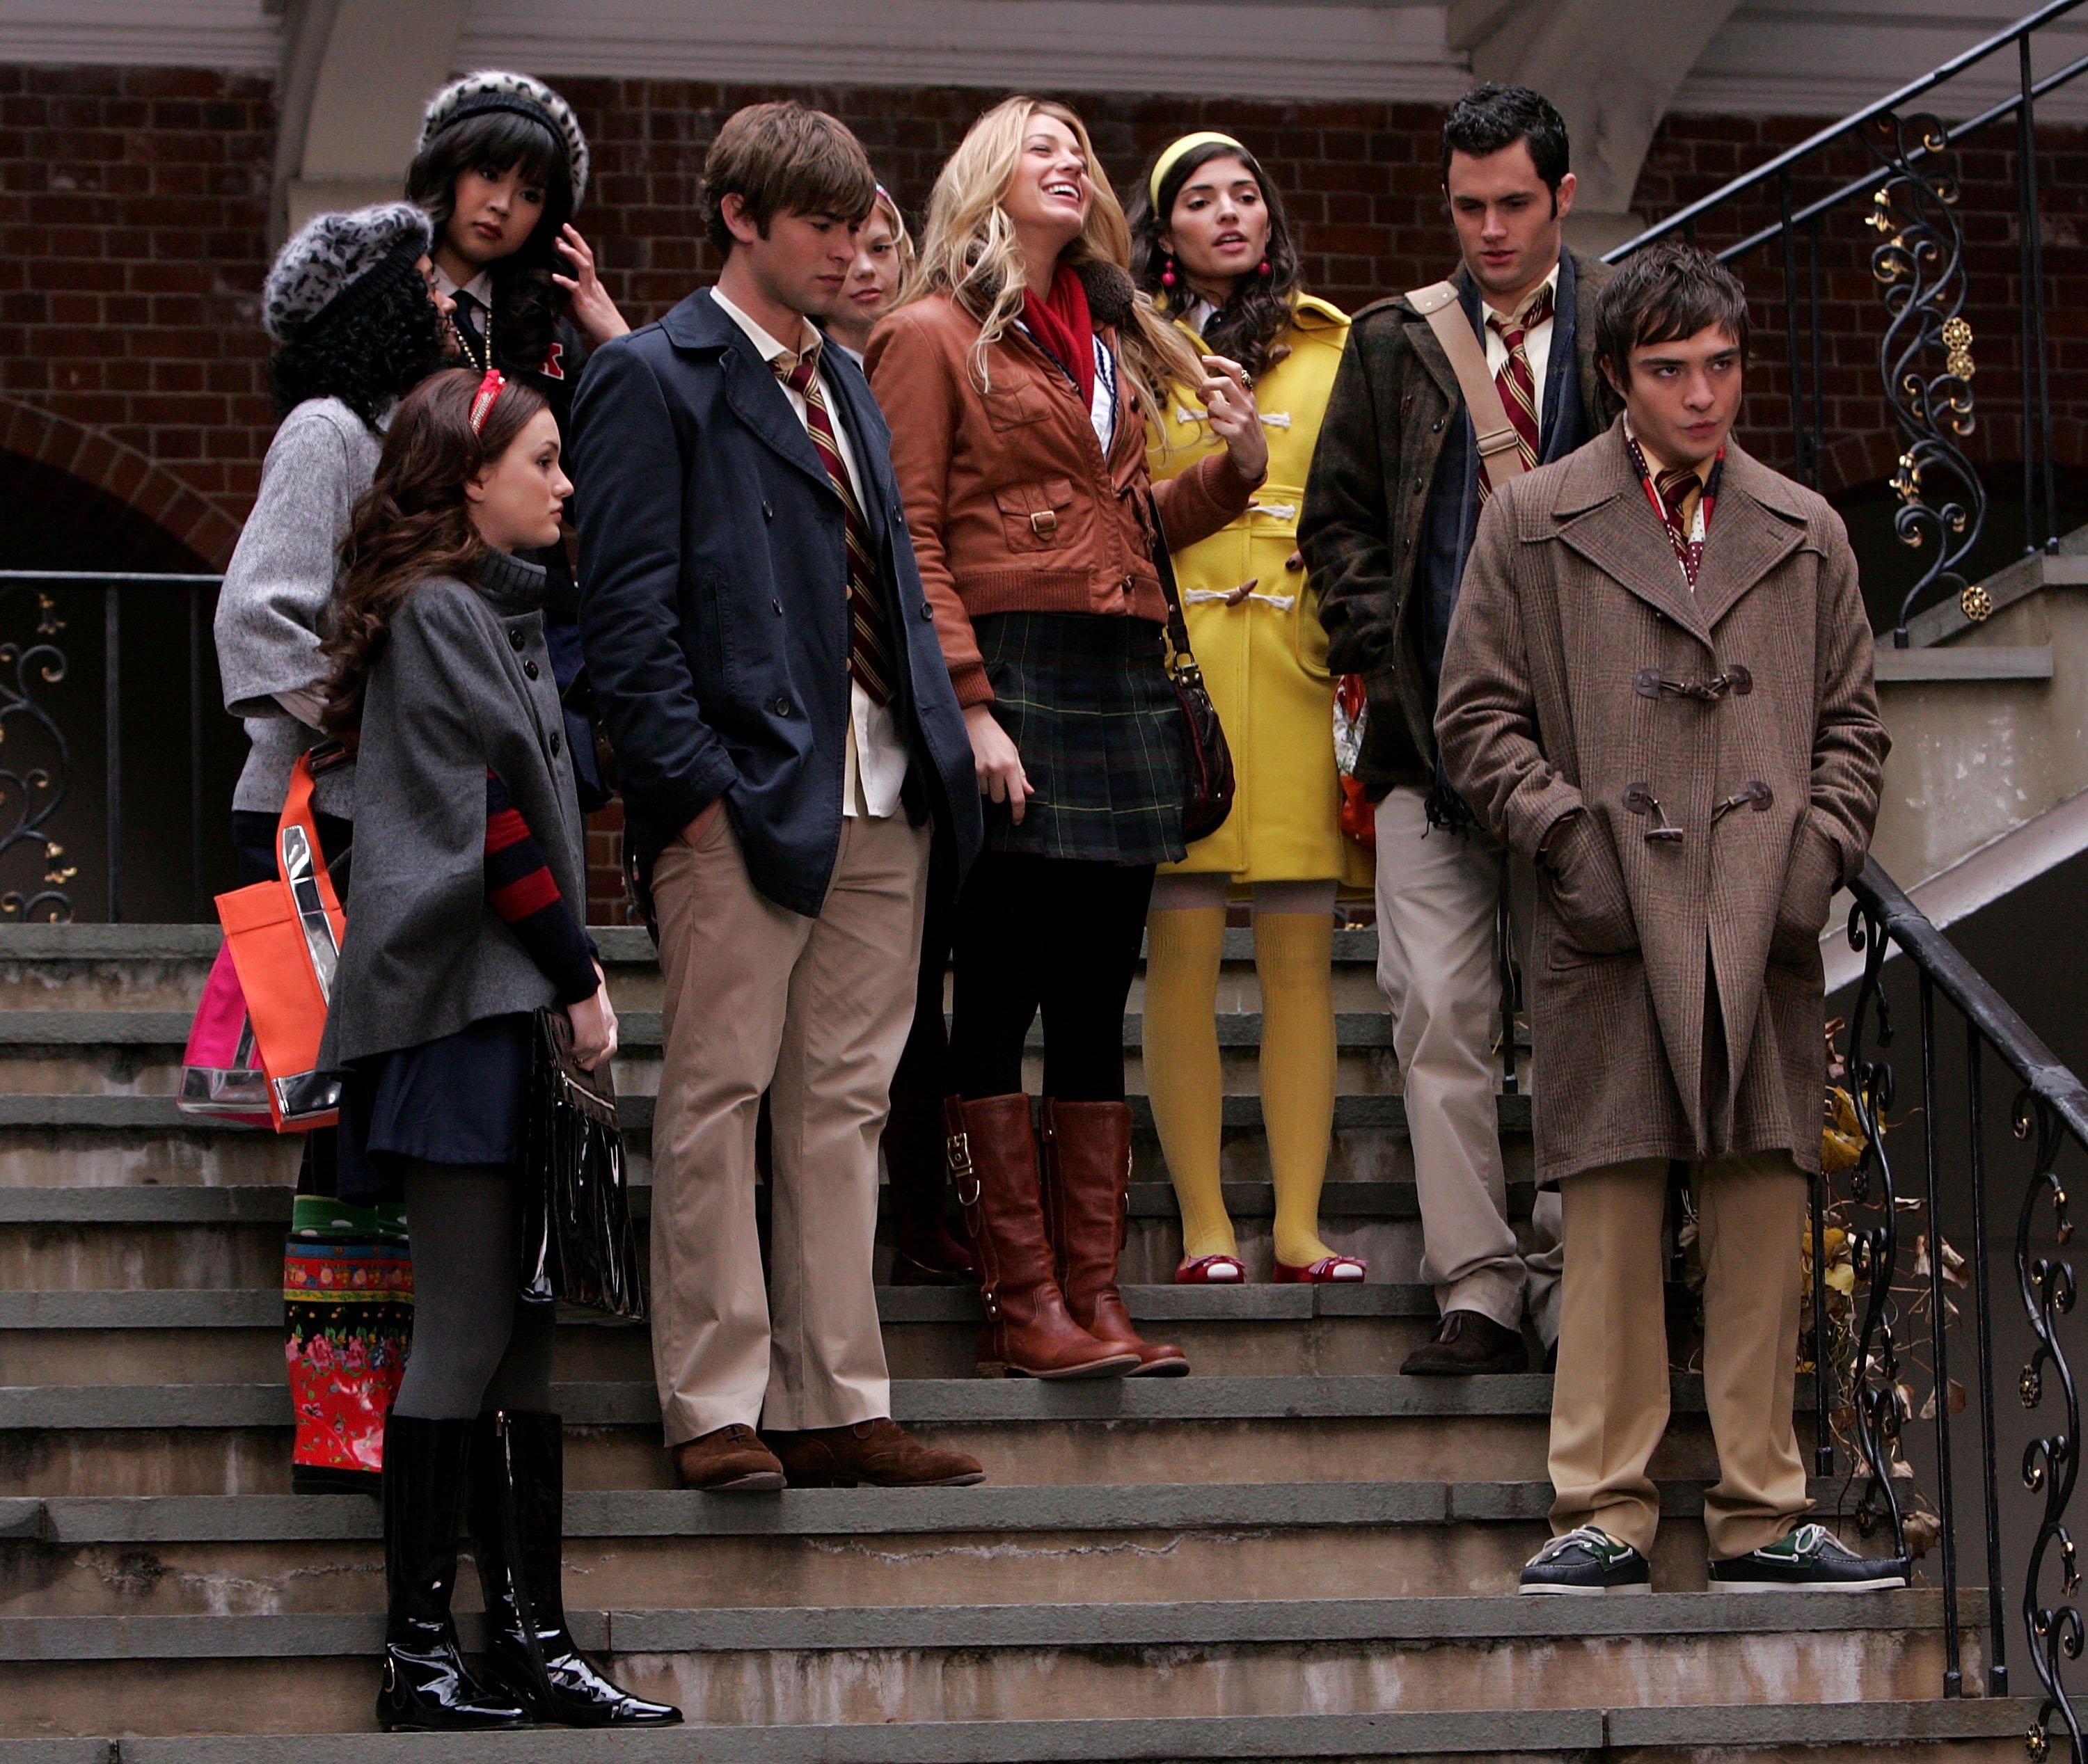 The cast of 'Gossip Girl' on location in New York City